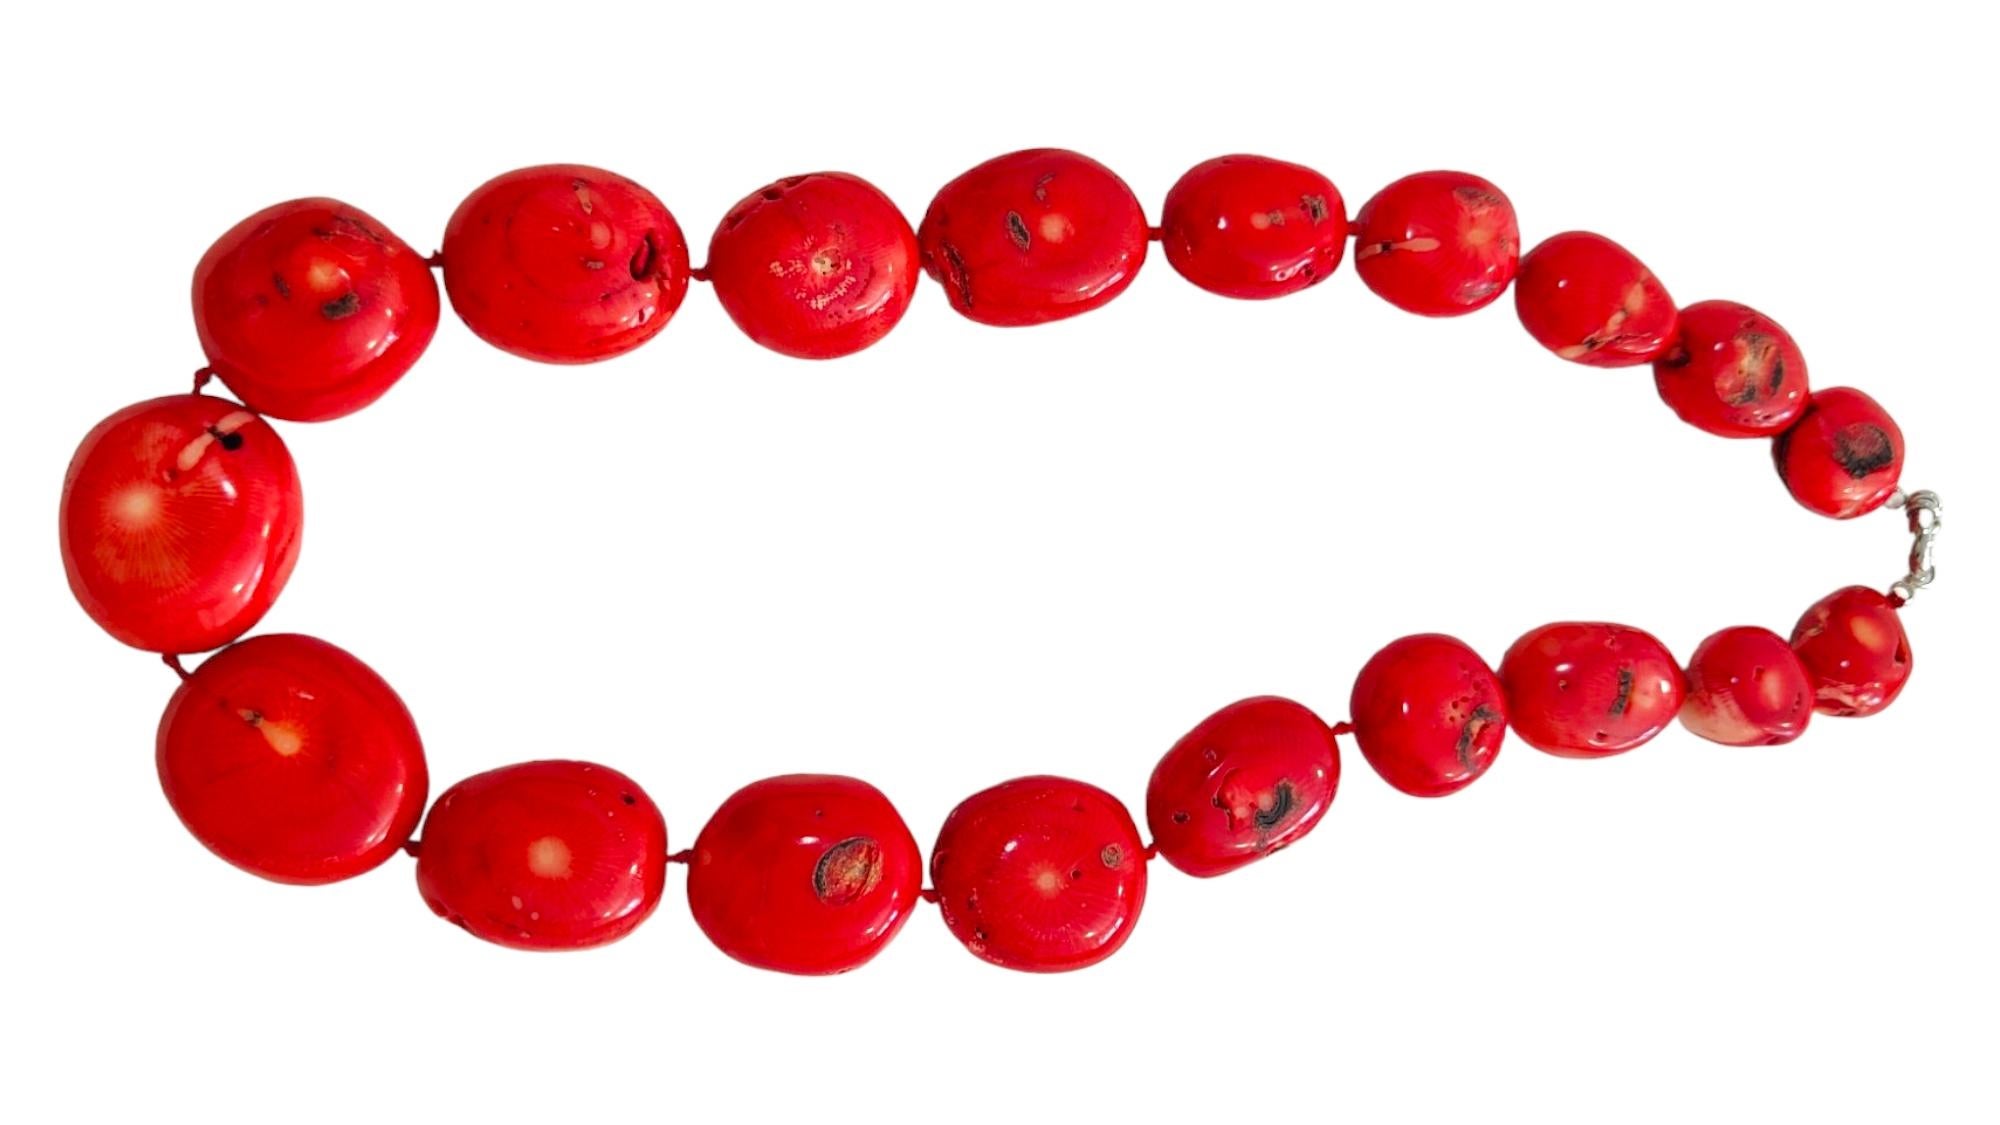 Huge Red Coral Necklace
Huge polished red coral beads complete this fascinating 67cm long necklace. The largest red coral bead is: 35 x 34 mm .436 grams in weight